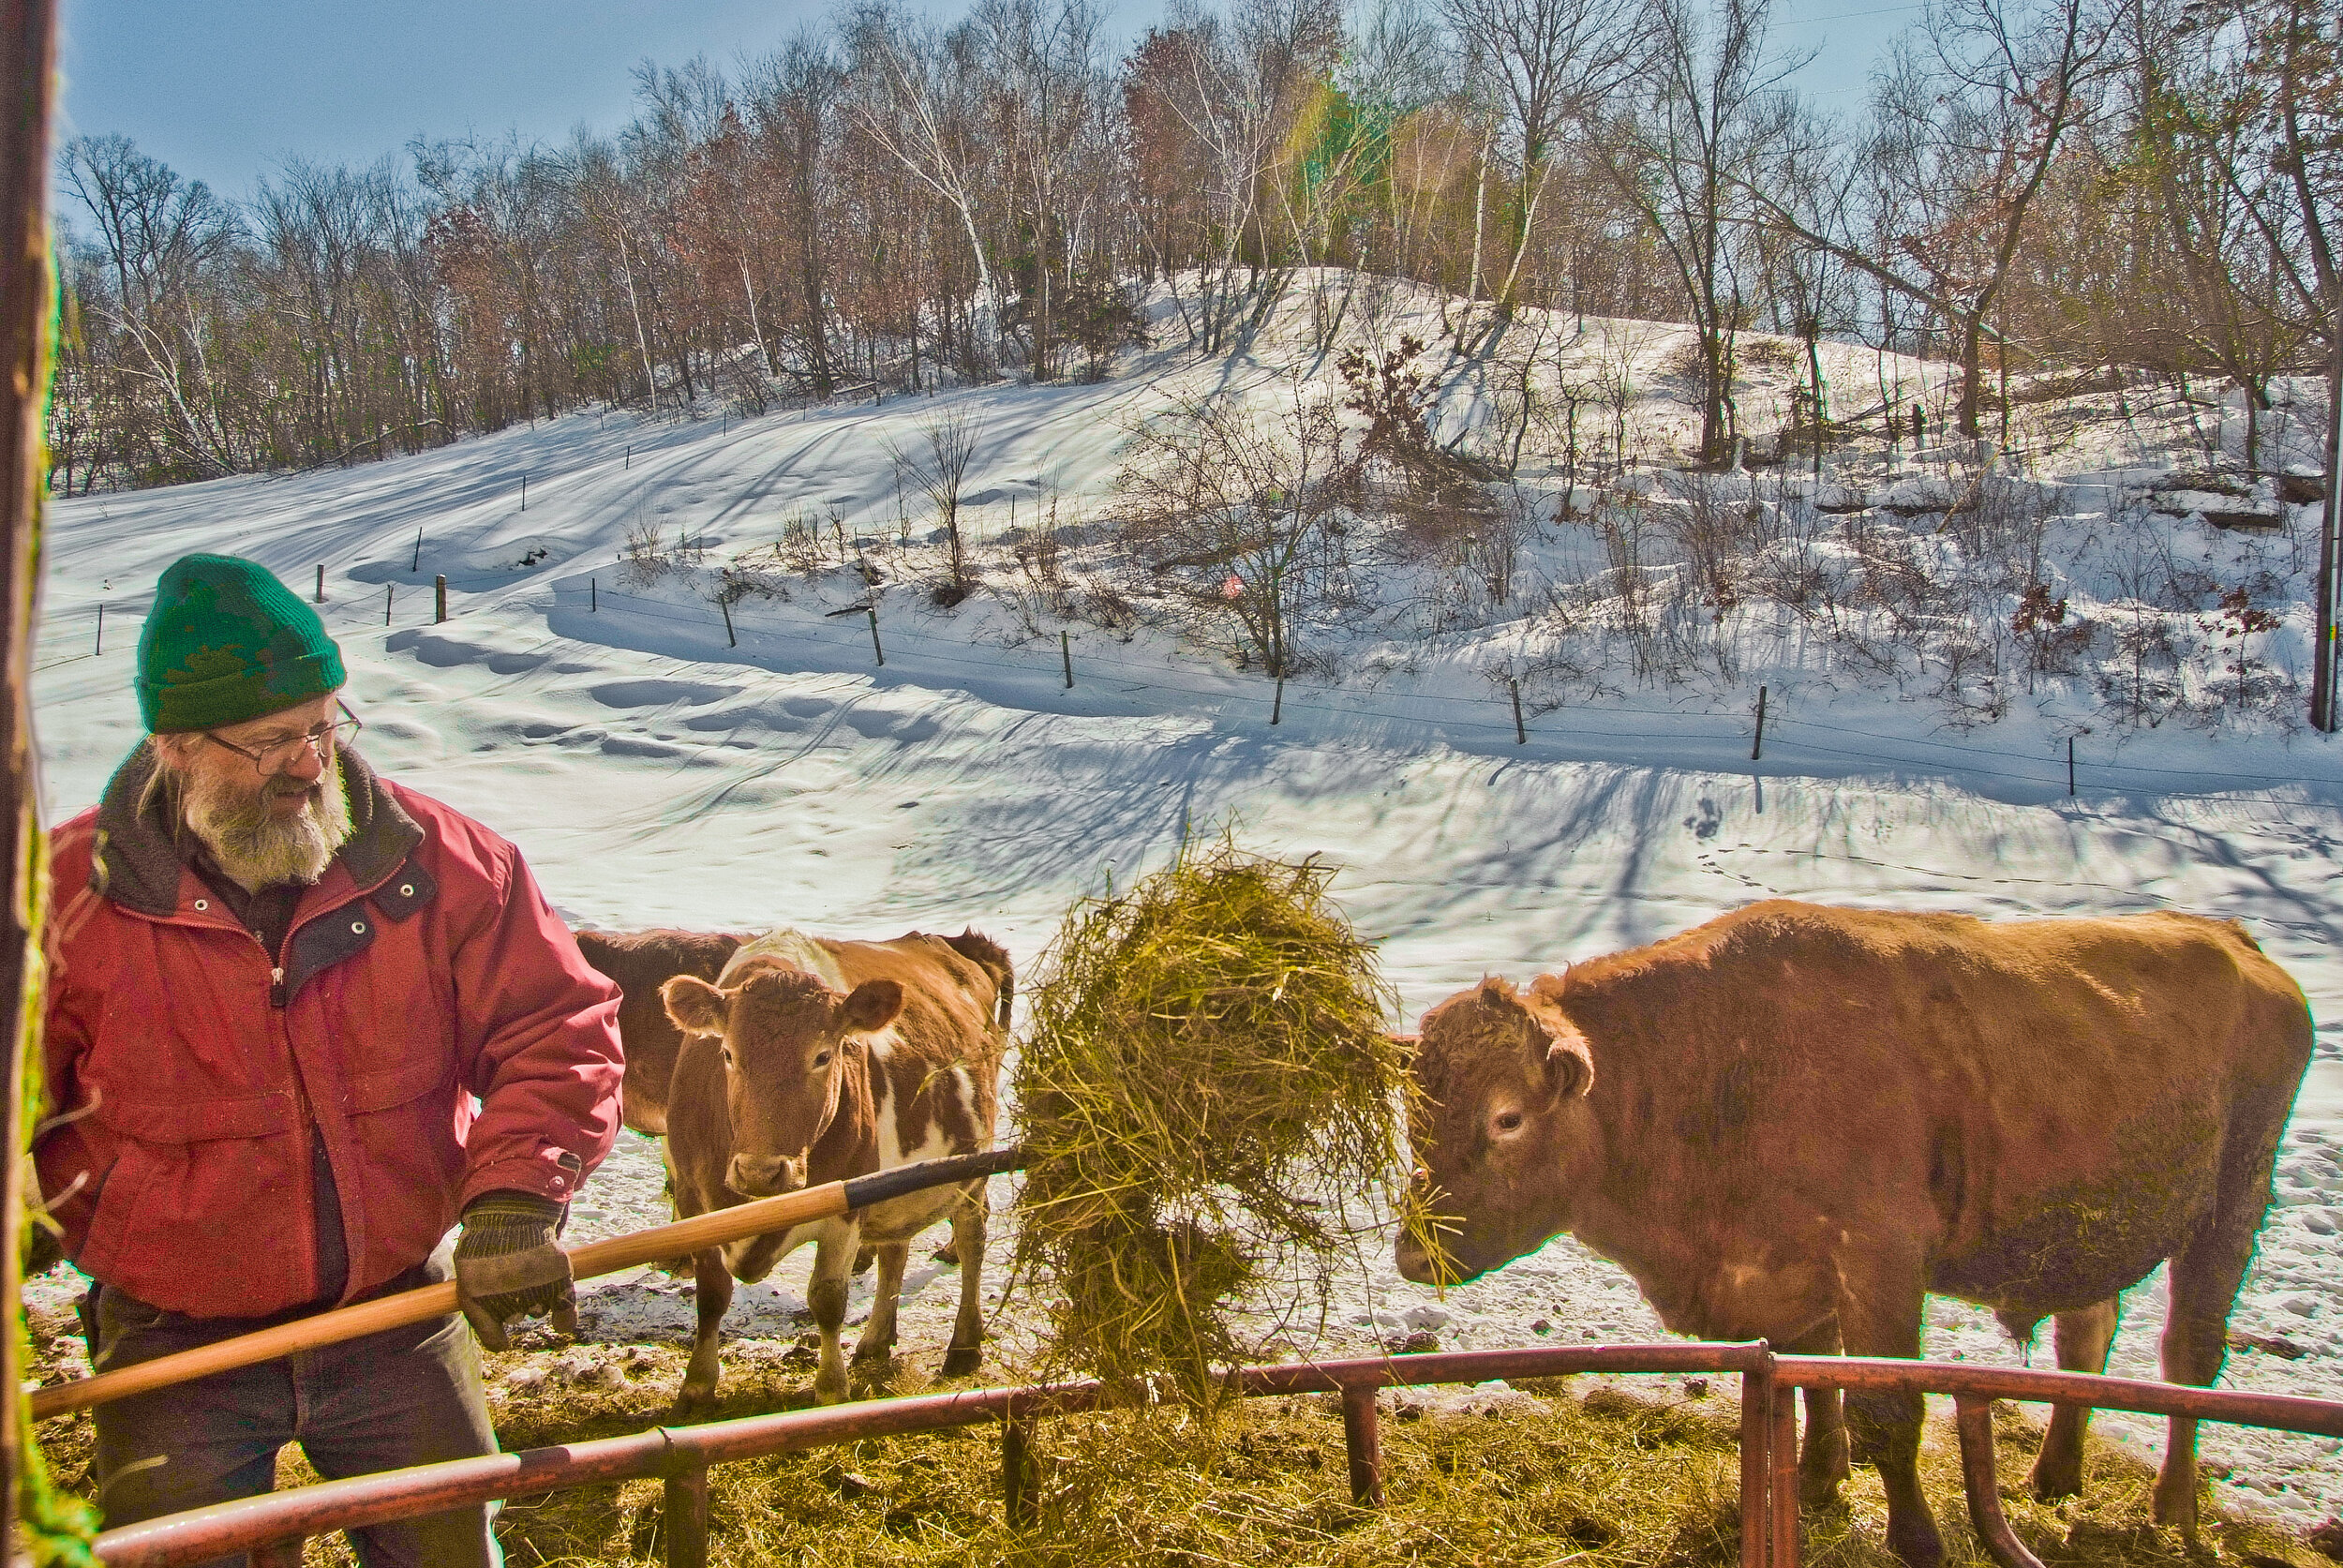 Person in red jacket shoveling hay in front of cattle in snowy field